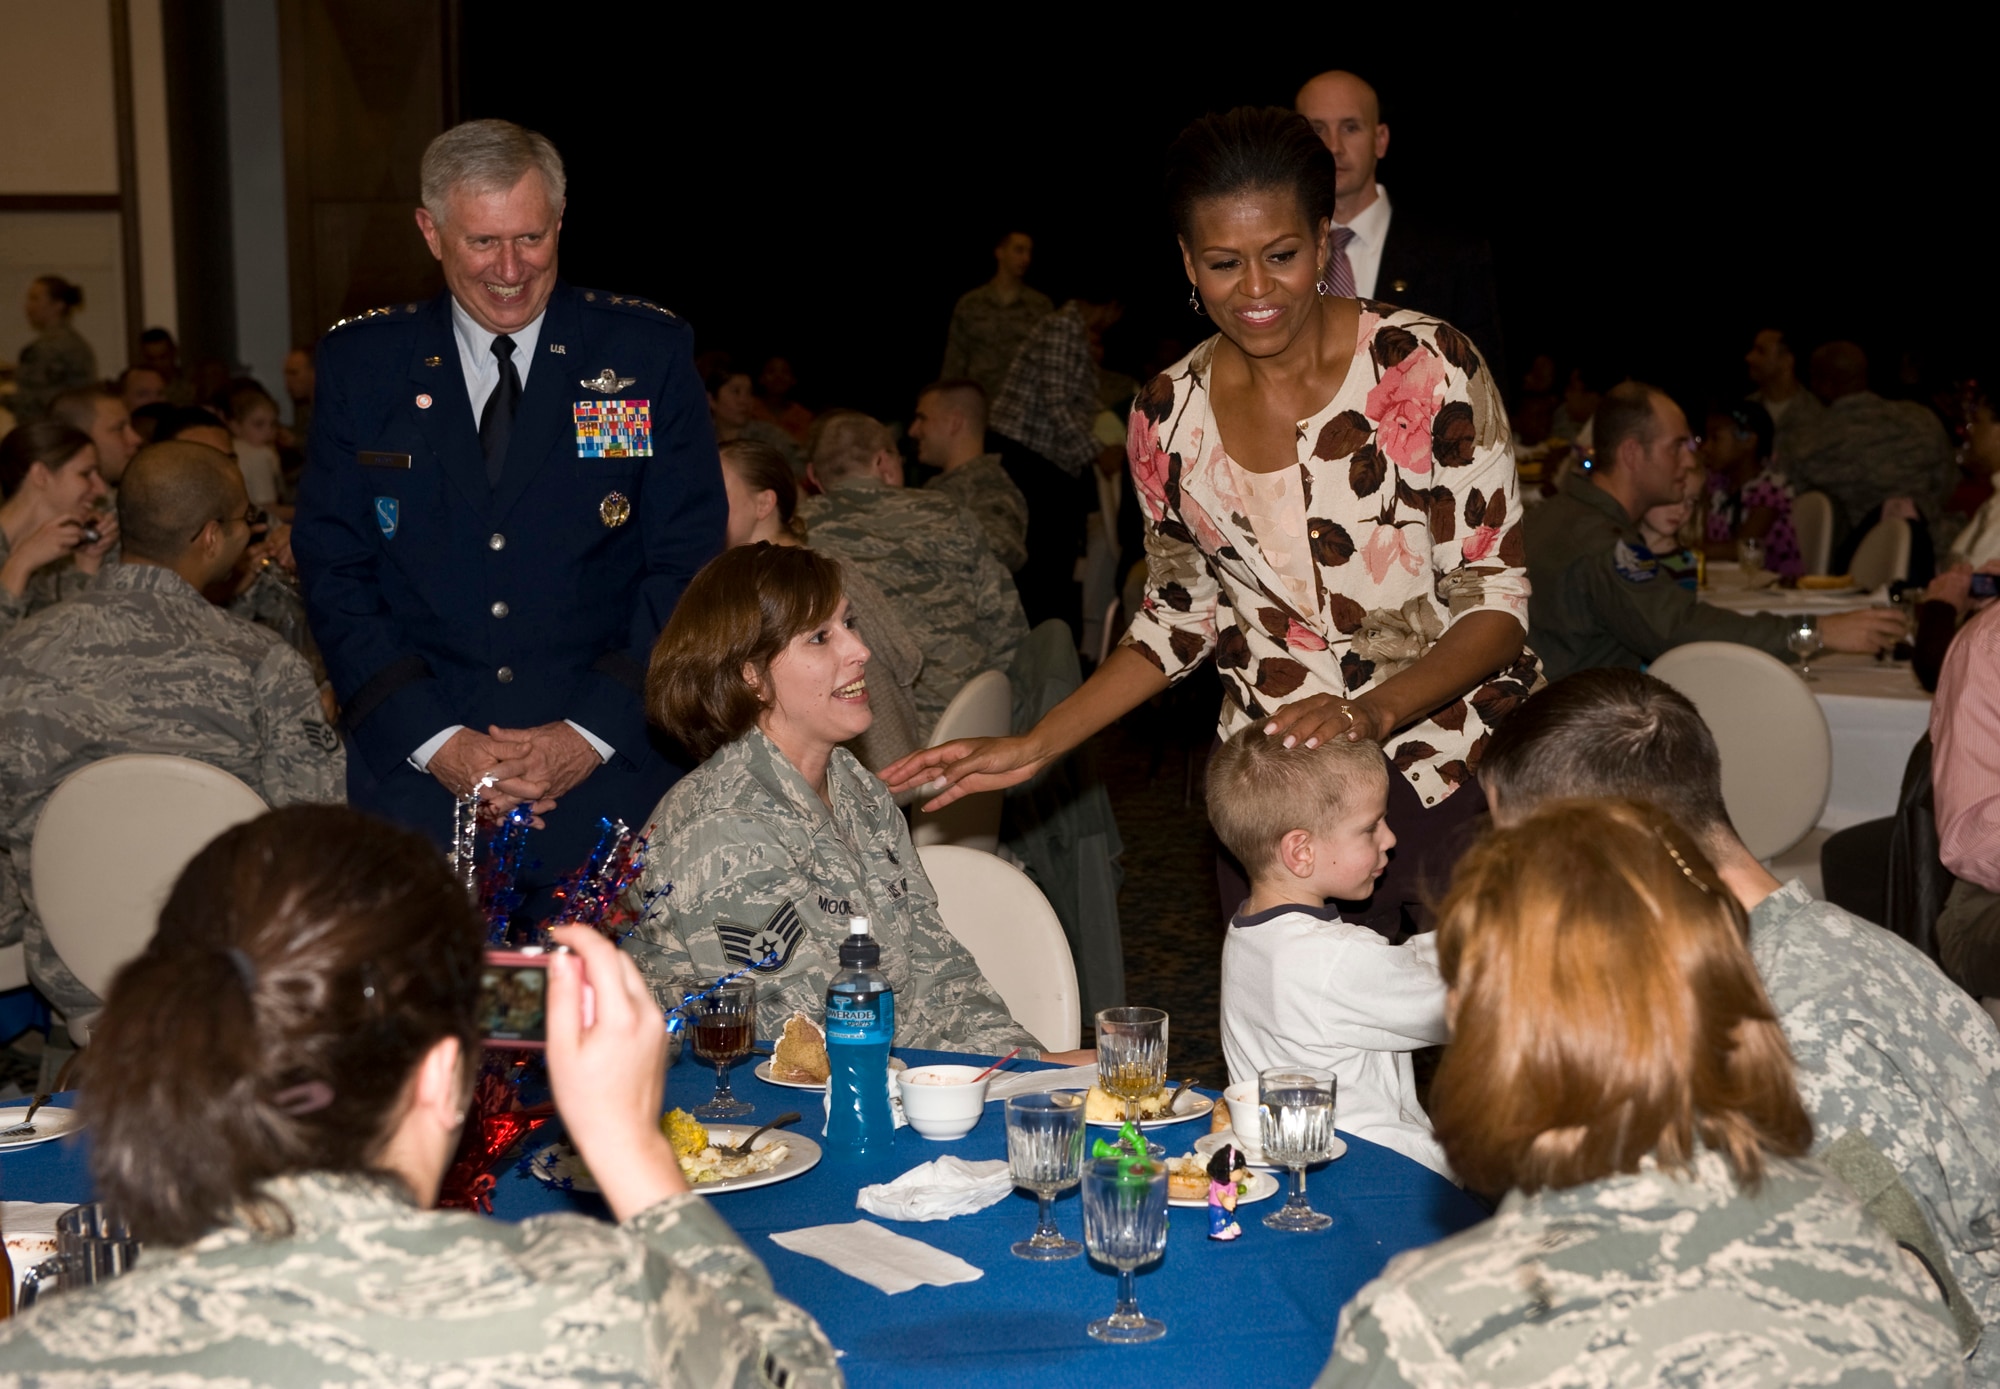 First Lady Michelle Obama and Gen.Roger A. Brady, U.S. Air Forces in Europe commander, visit with servicemembers and their families during a Veterans Day dinner, Ramstein Air Base, Germany, Nov. 11, 2010. The First Lady made a surprise visit to Ramstein during her return from a nine-day tour of Asia to show her support for servicemembers and their families during this Veterans Day. She met with wounded servicemembers at Landstuhl Regional Medical Center, served lunch, talked briefly to the servicemembers and families and met with German first lady Bettina Wulff before flying on to the United States. (U.S. Air Force photo/Tech. Sgt. Wayne Clark) 